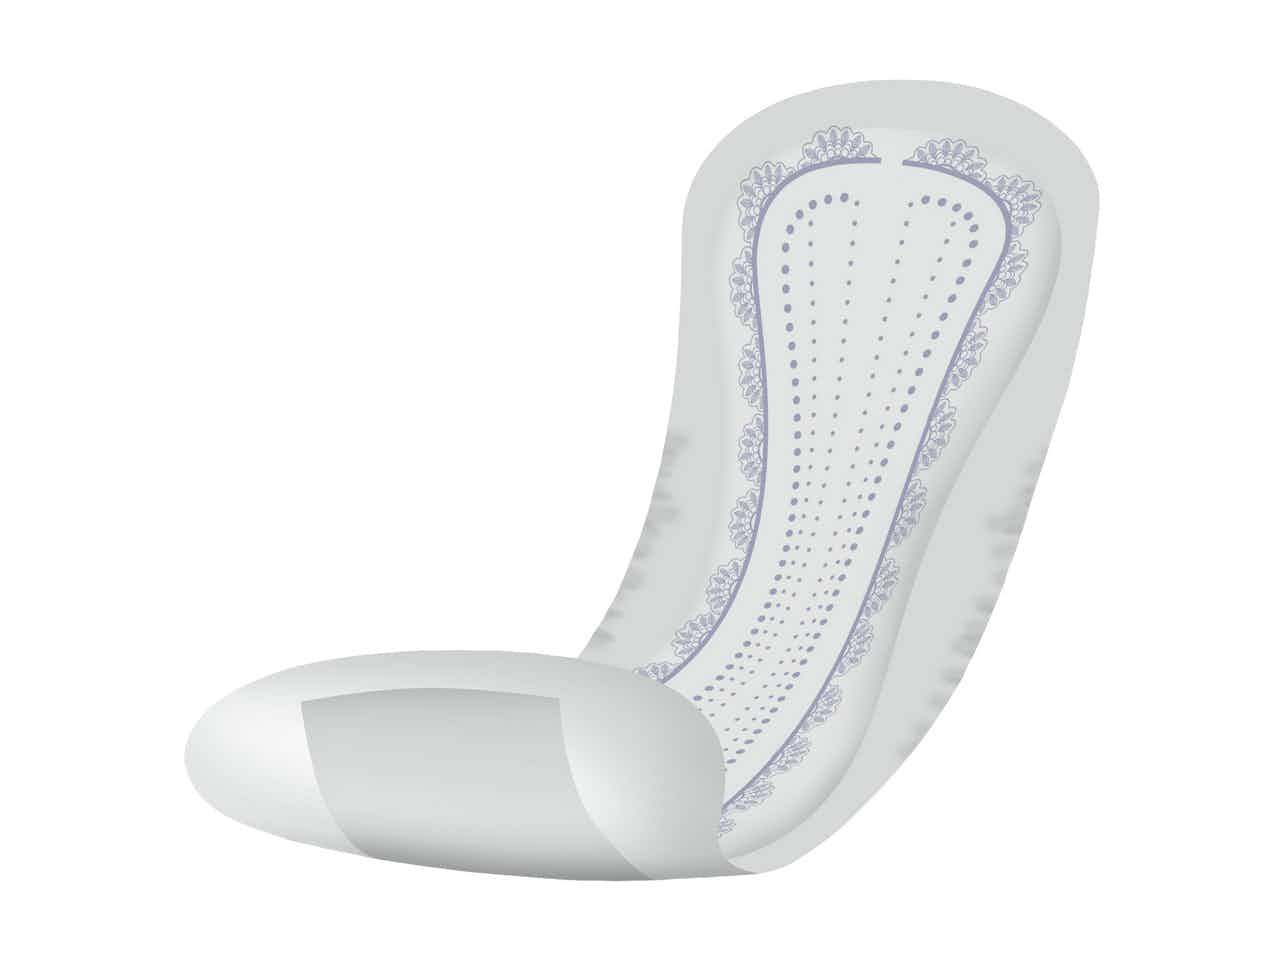 Prevail Curve Pads, Ultimate